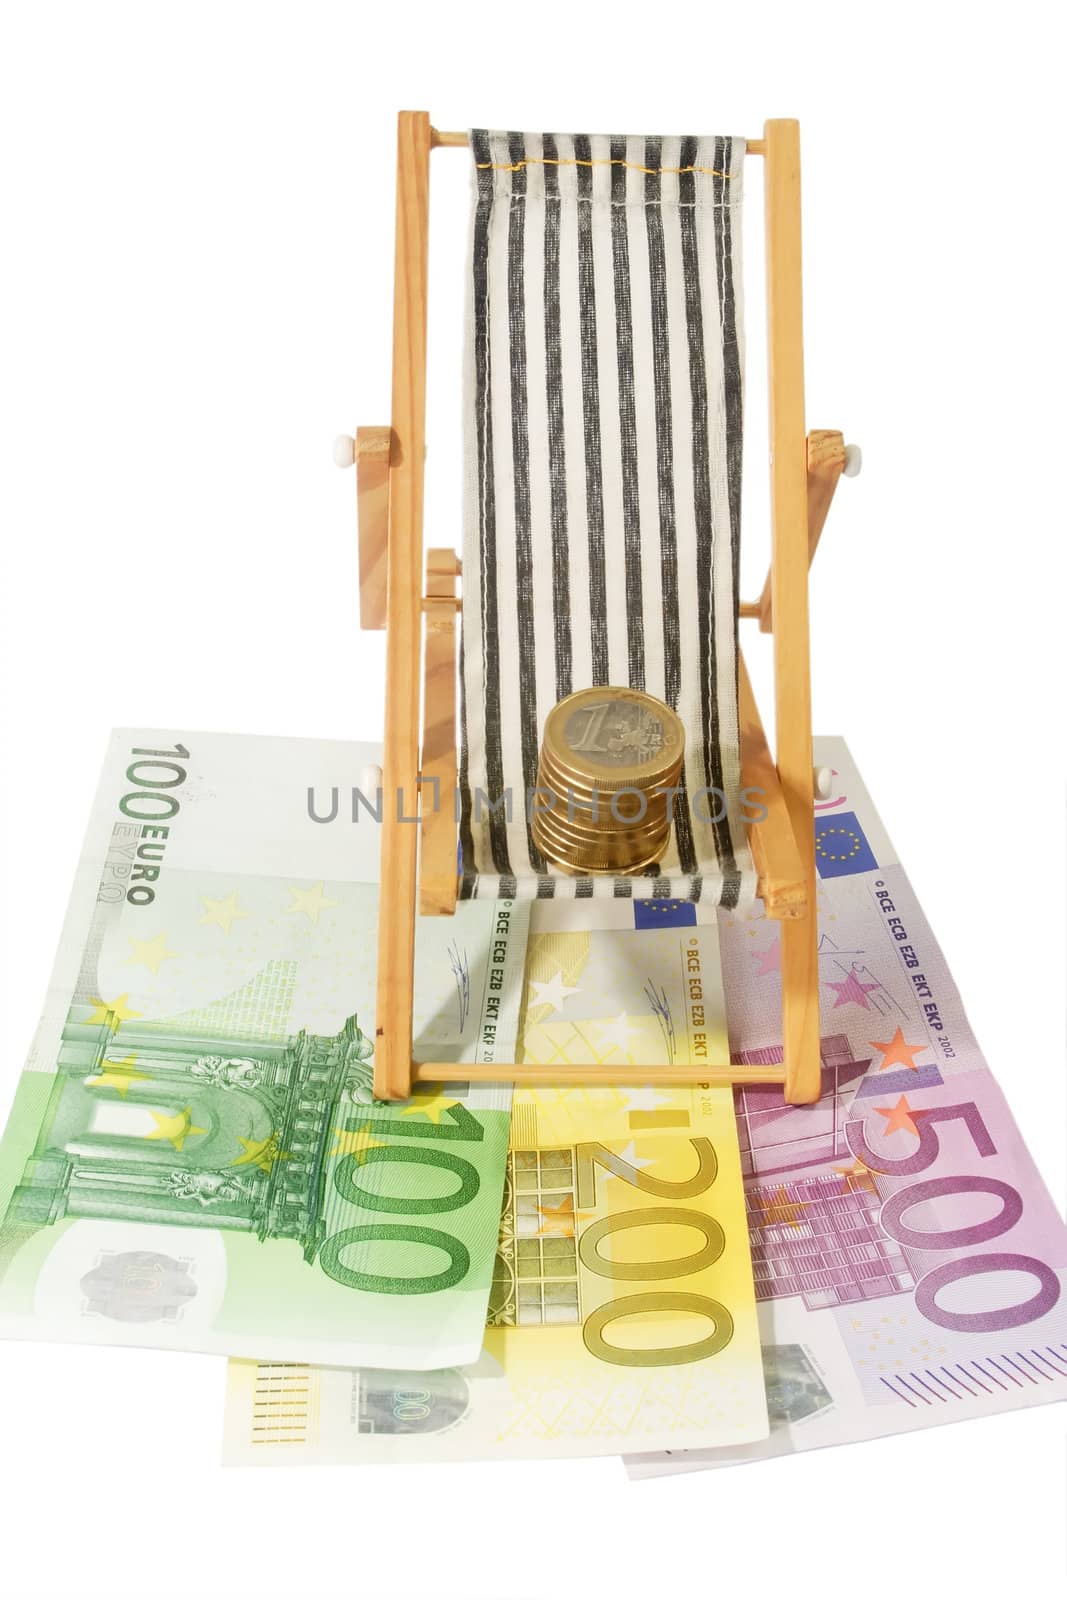 Model of canvas chair and euro coins and banknotes
